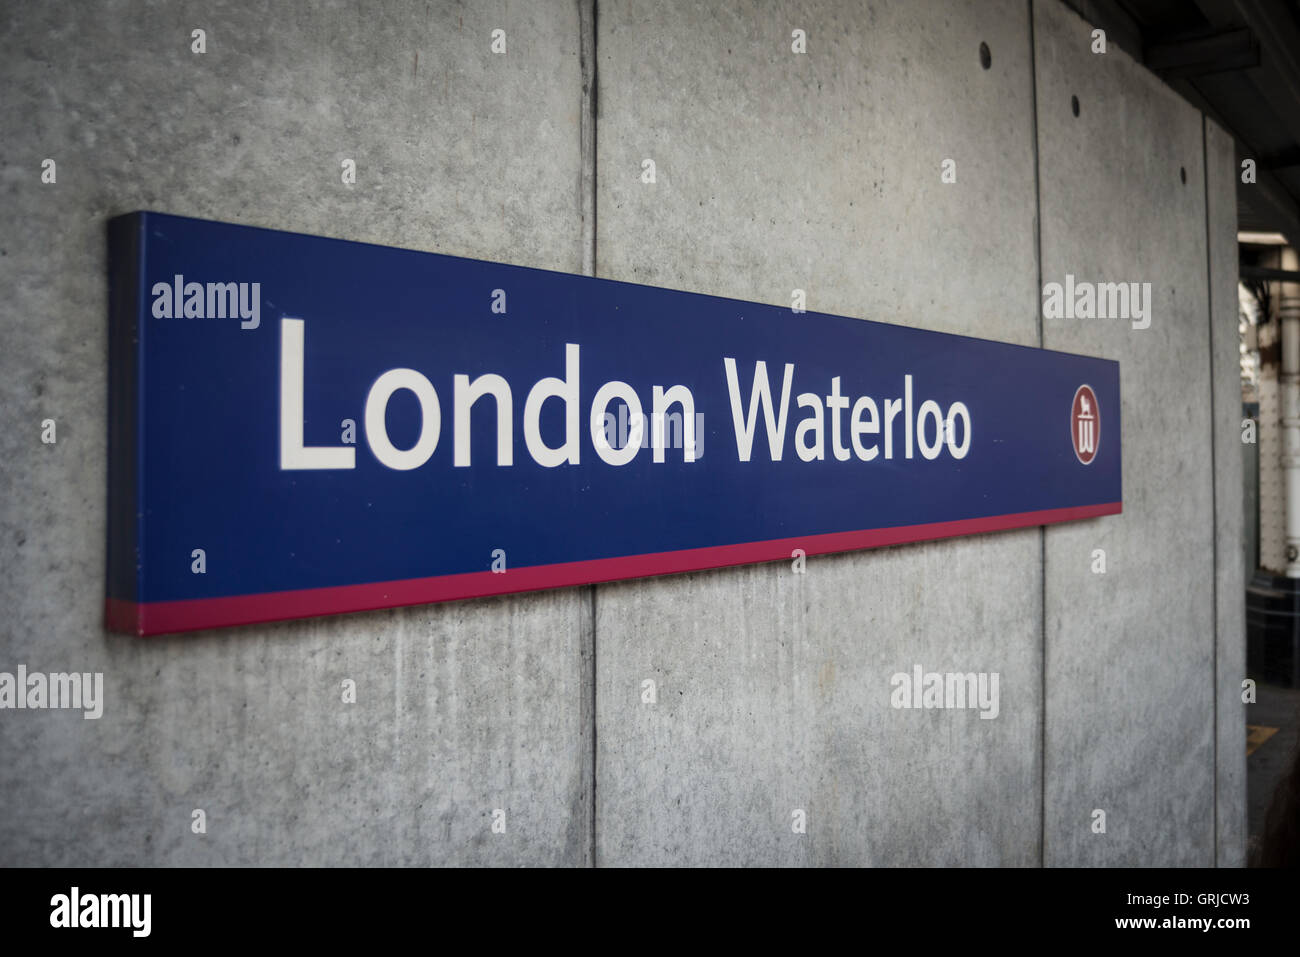 London Waterloo station sign on a wall by the platform Stock Photo